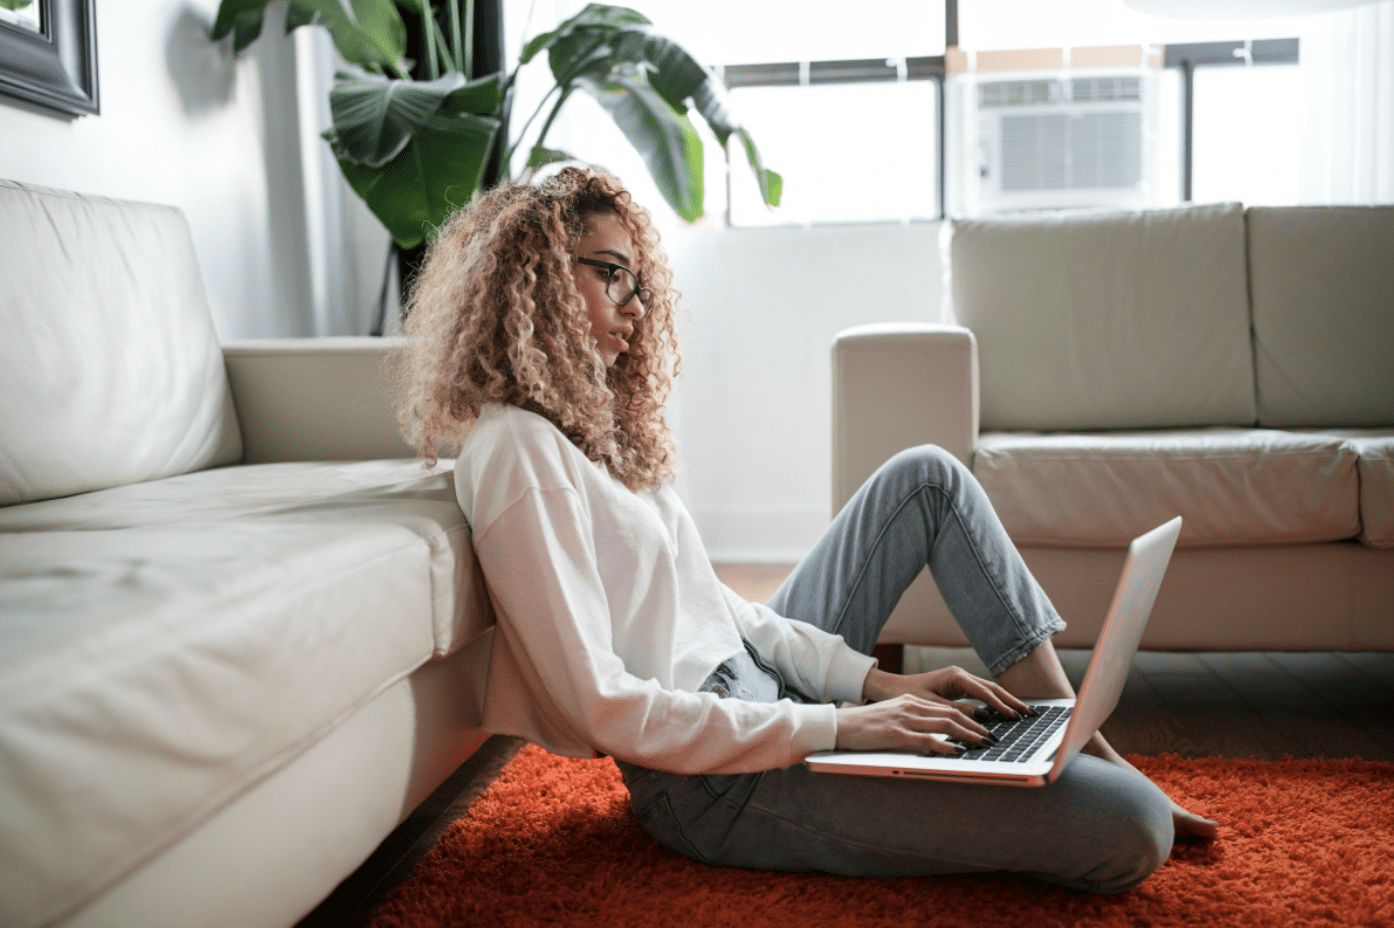 Young woman sitting on floor using laptop; image by ThoughtCatalog.com, via Unsplash.com.